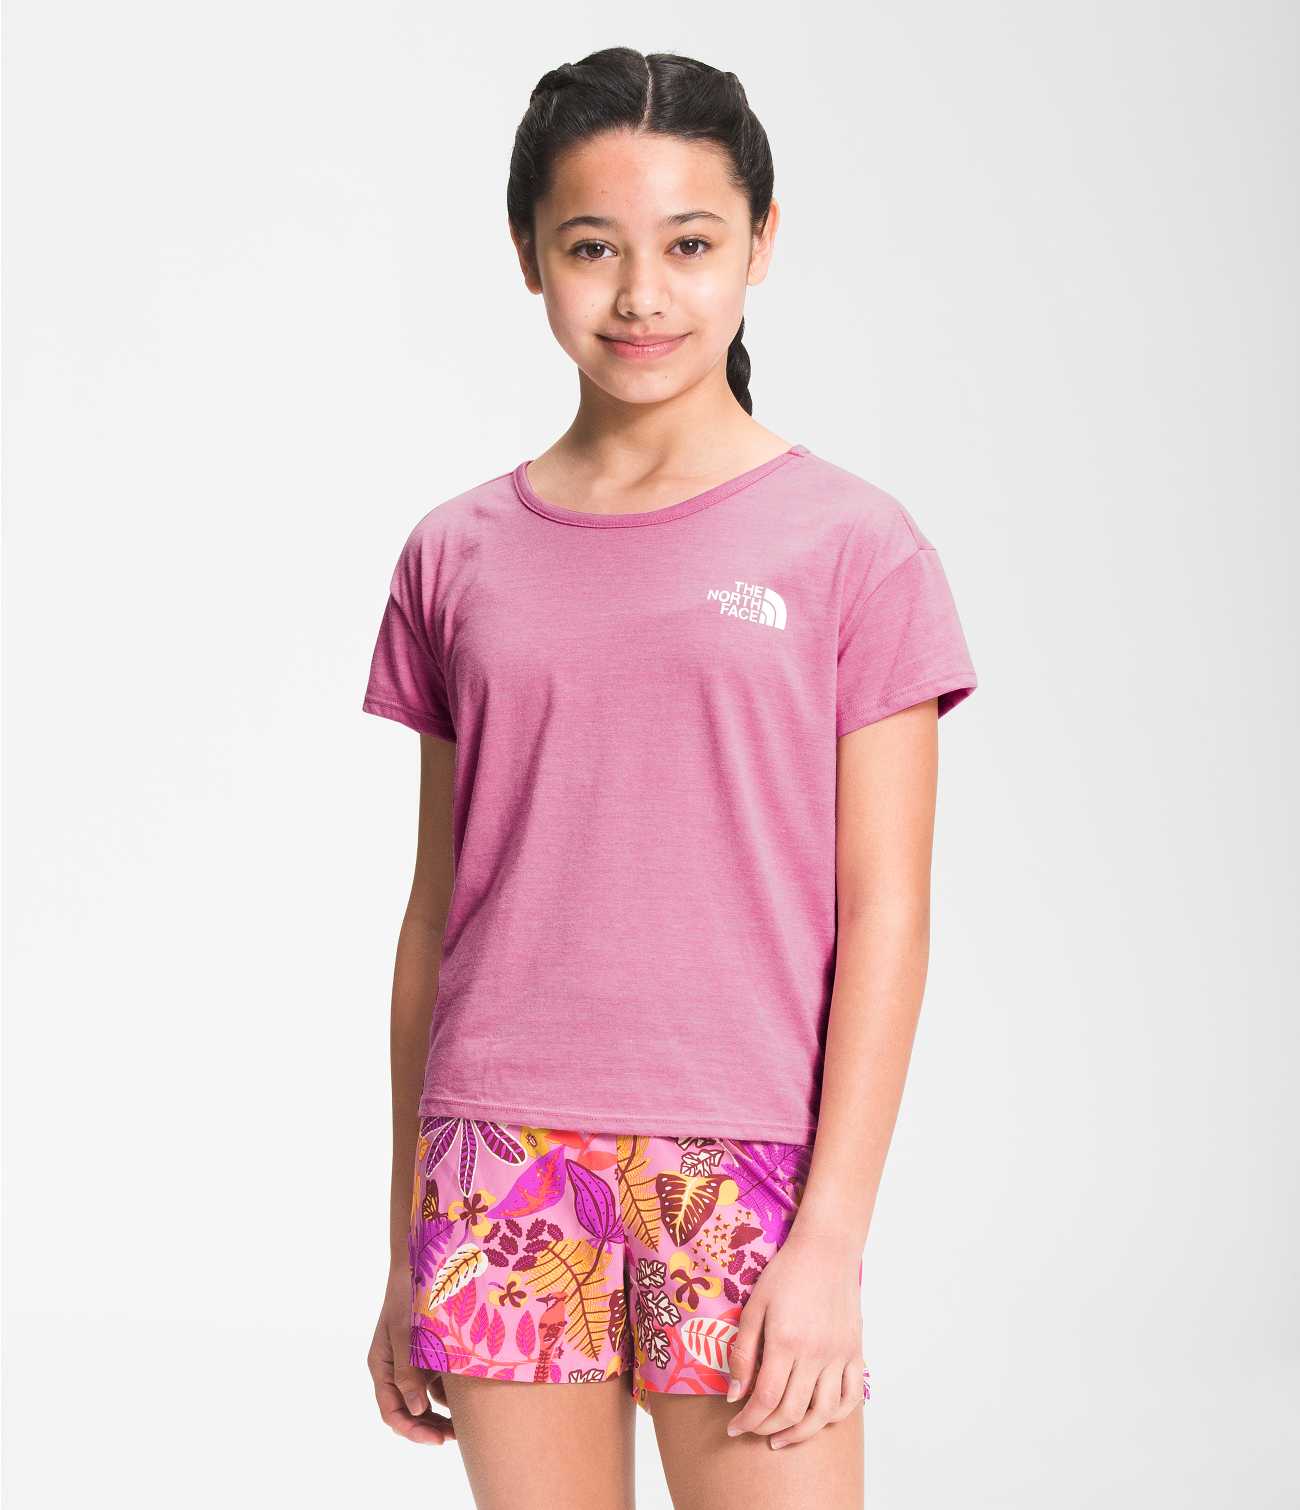 GIRLS' S/S TRI-BLEND TEE, The North Face